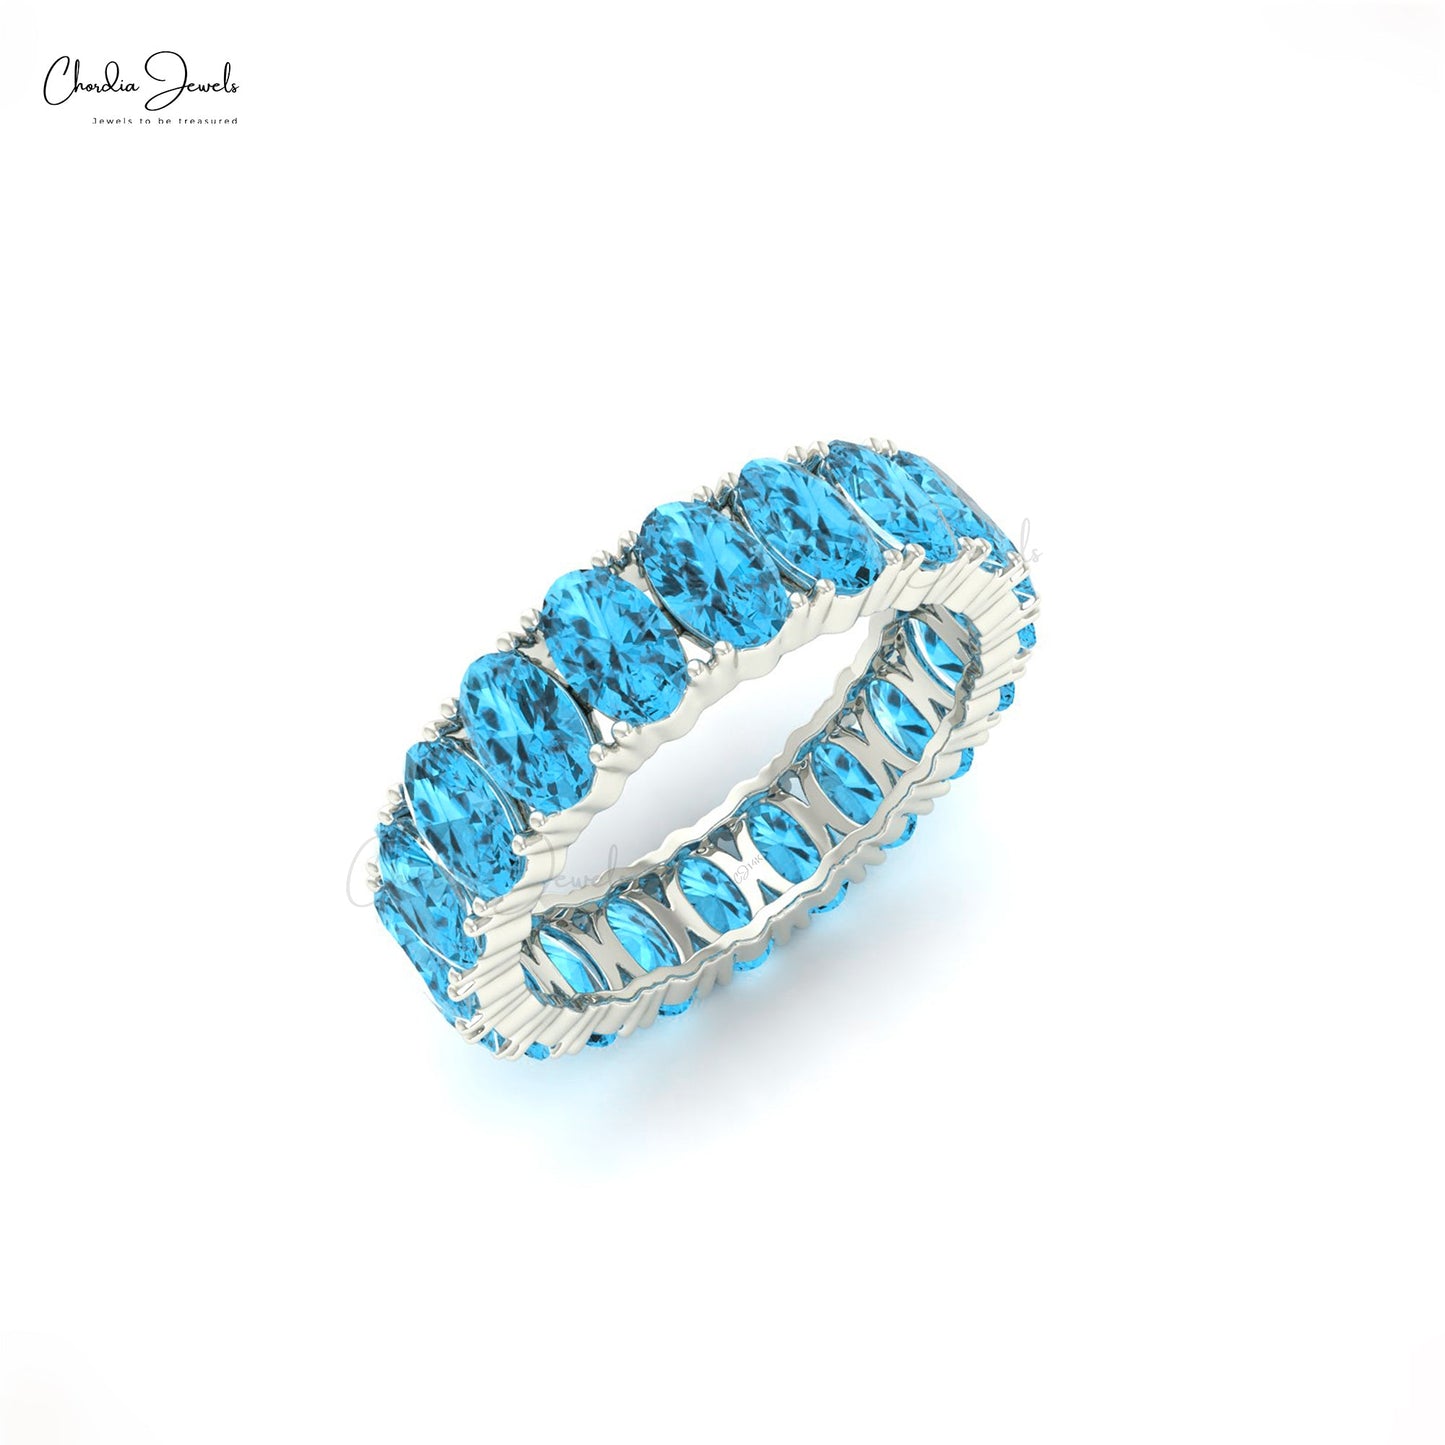 Swiss Blue Topaz Eternity Band 14k Solid Gold Eternity Band 5x3mm Oval Faceted Gemstone Band Thumb Ring Gift for Her